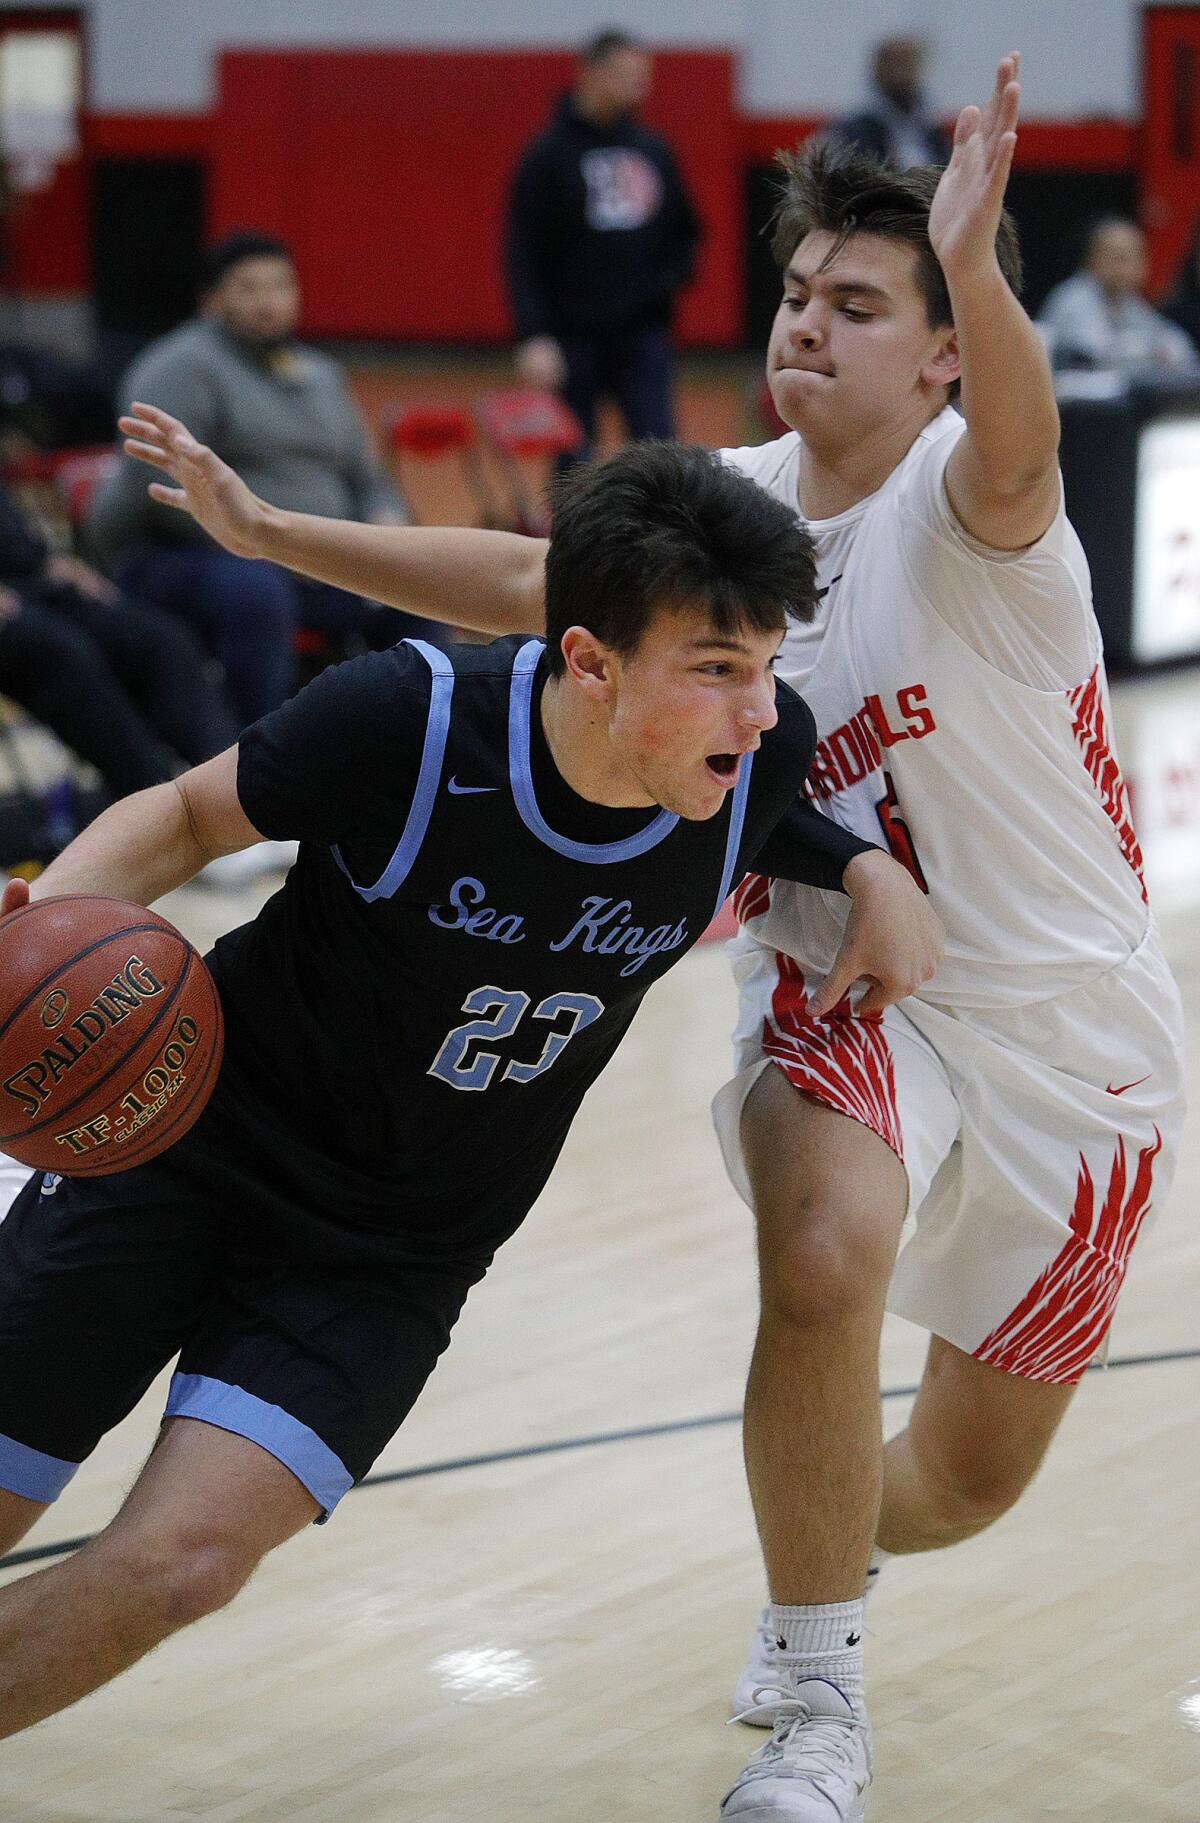 Corona del Mar High senior guard Jack Stone, shown competing in the Artesia Winter Classic on Wednesday, scored a game-high 34 points for the Sea Kings in a 71-67 title game win over Palos Verdes on Saturday.